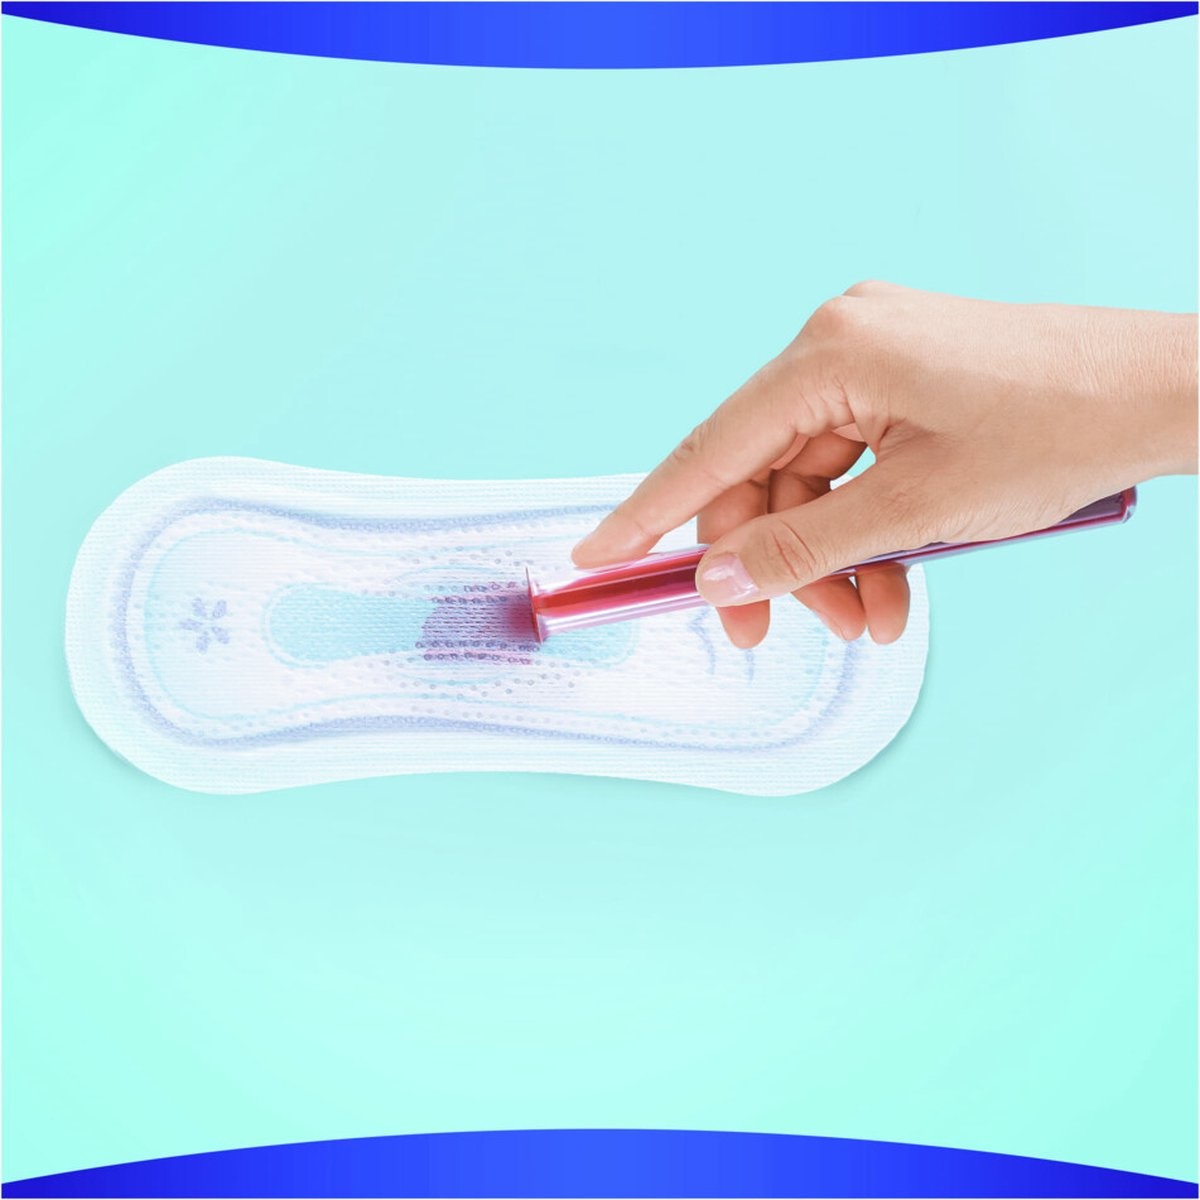 Always Sanitary Pads Ultra Long 14 pieces